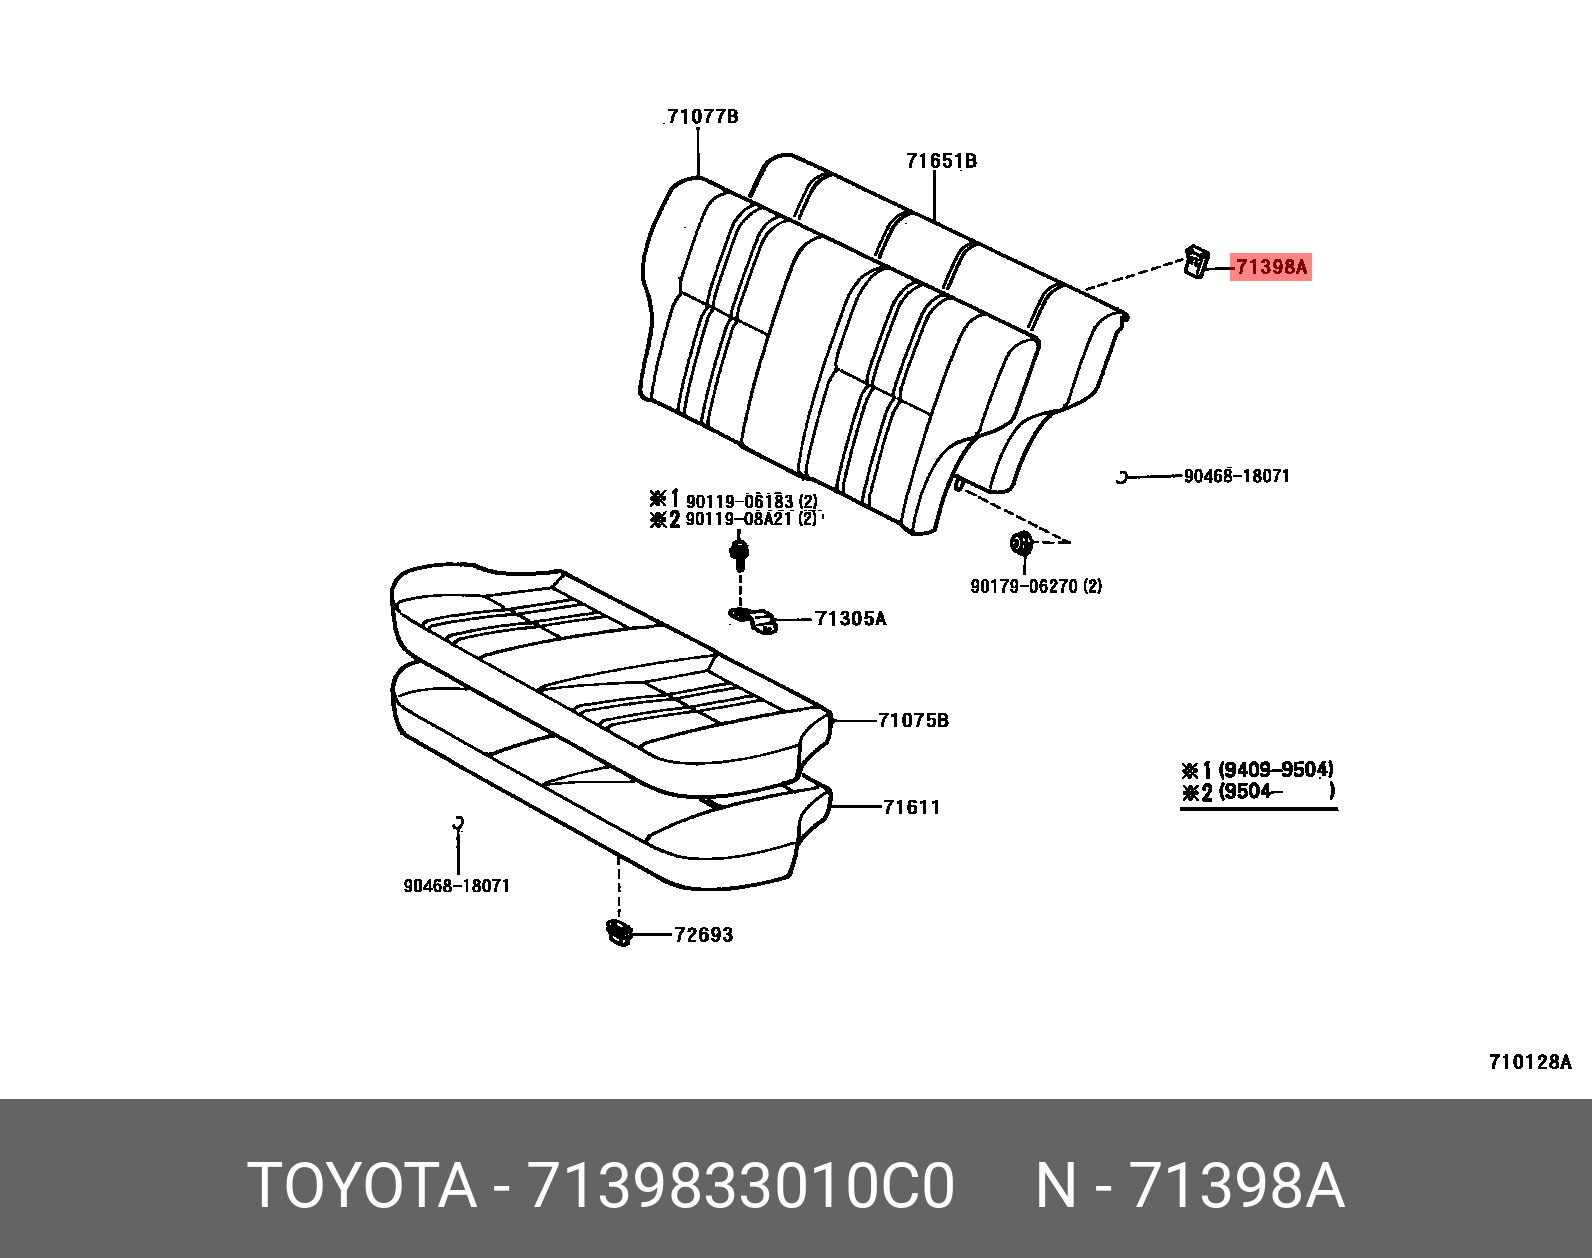 CAMRY 200601 - 201108, HOLDER, REAR SEAT BACK